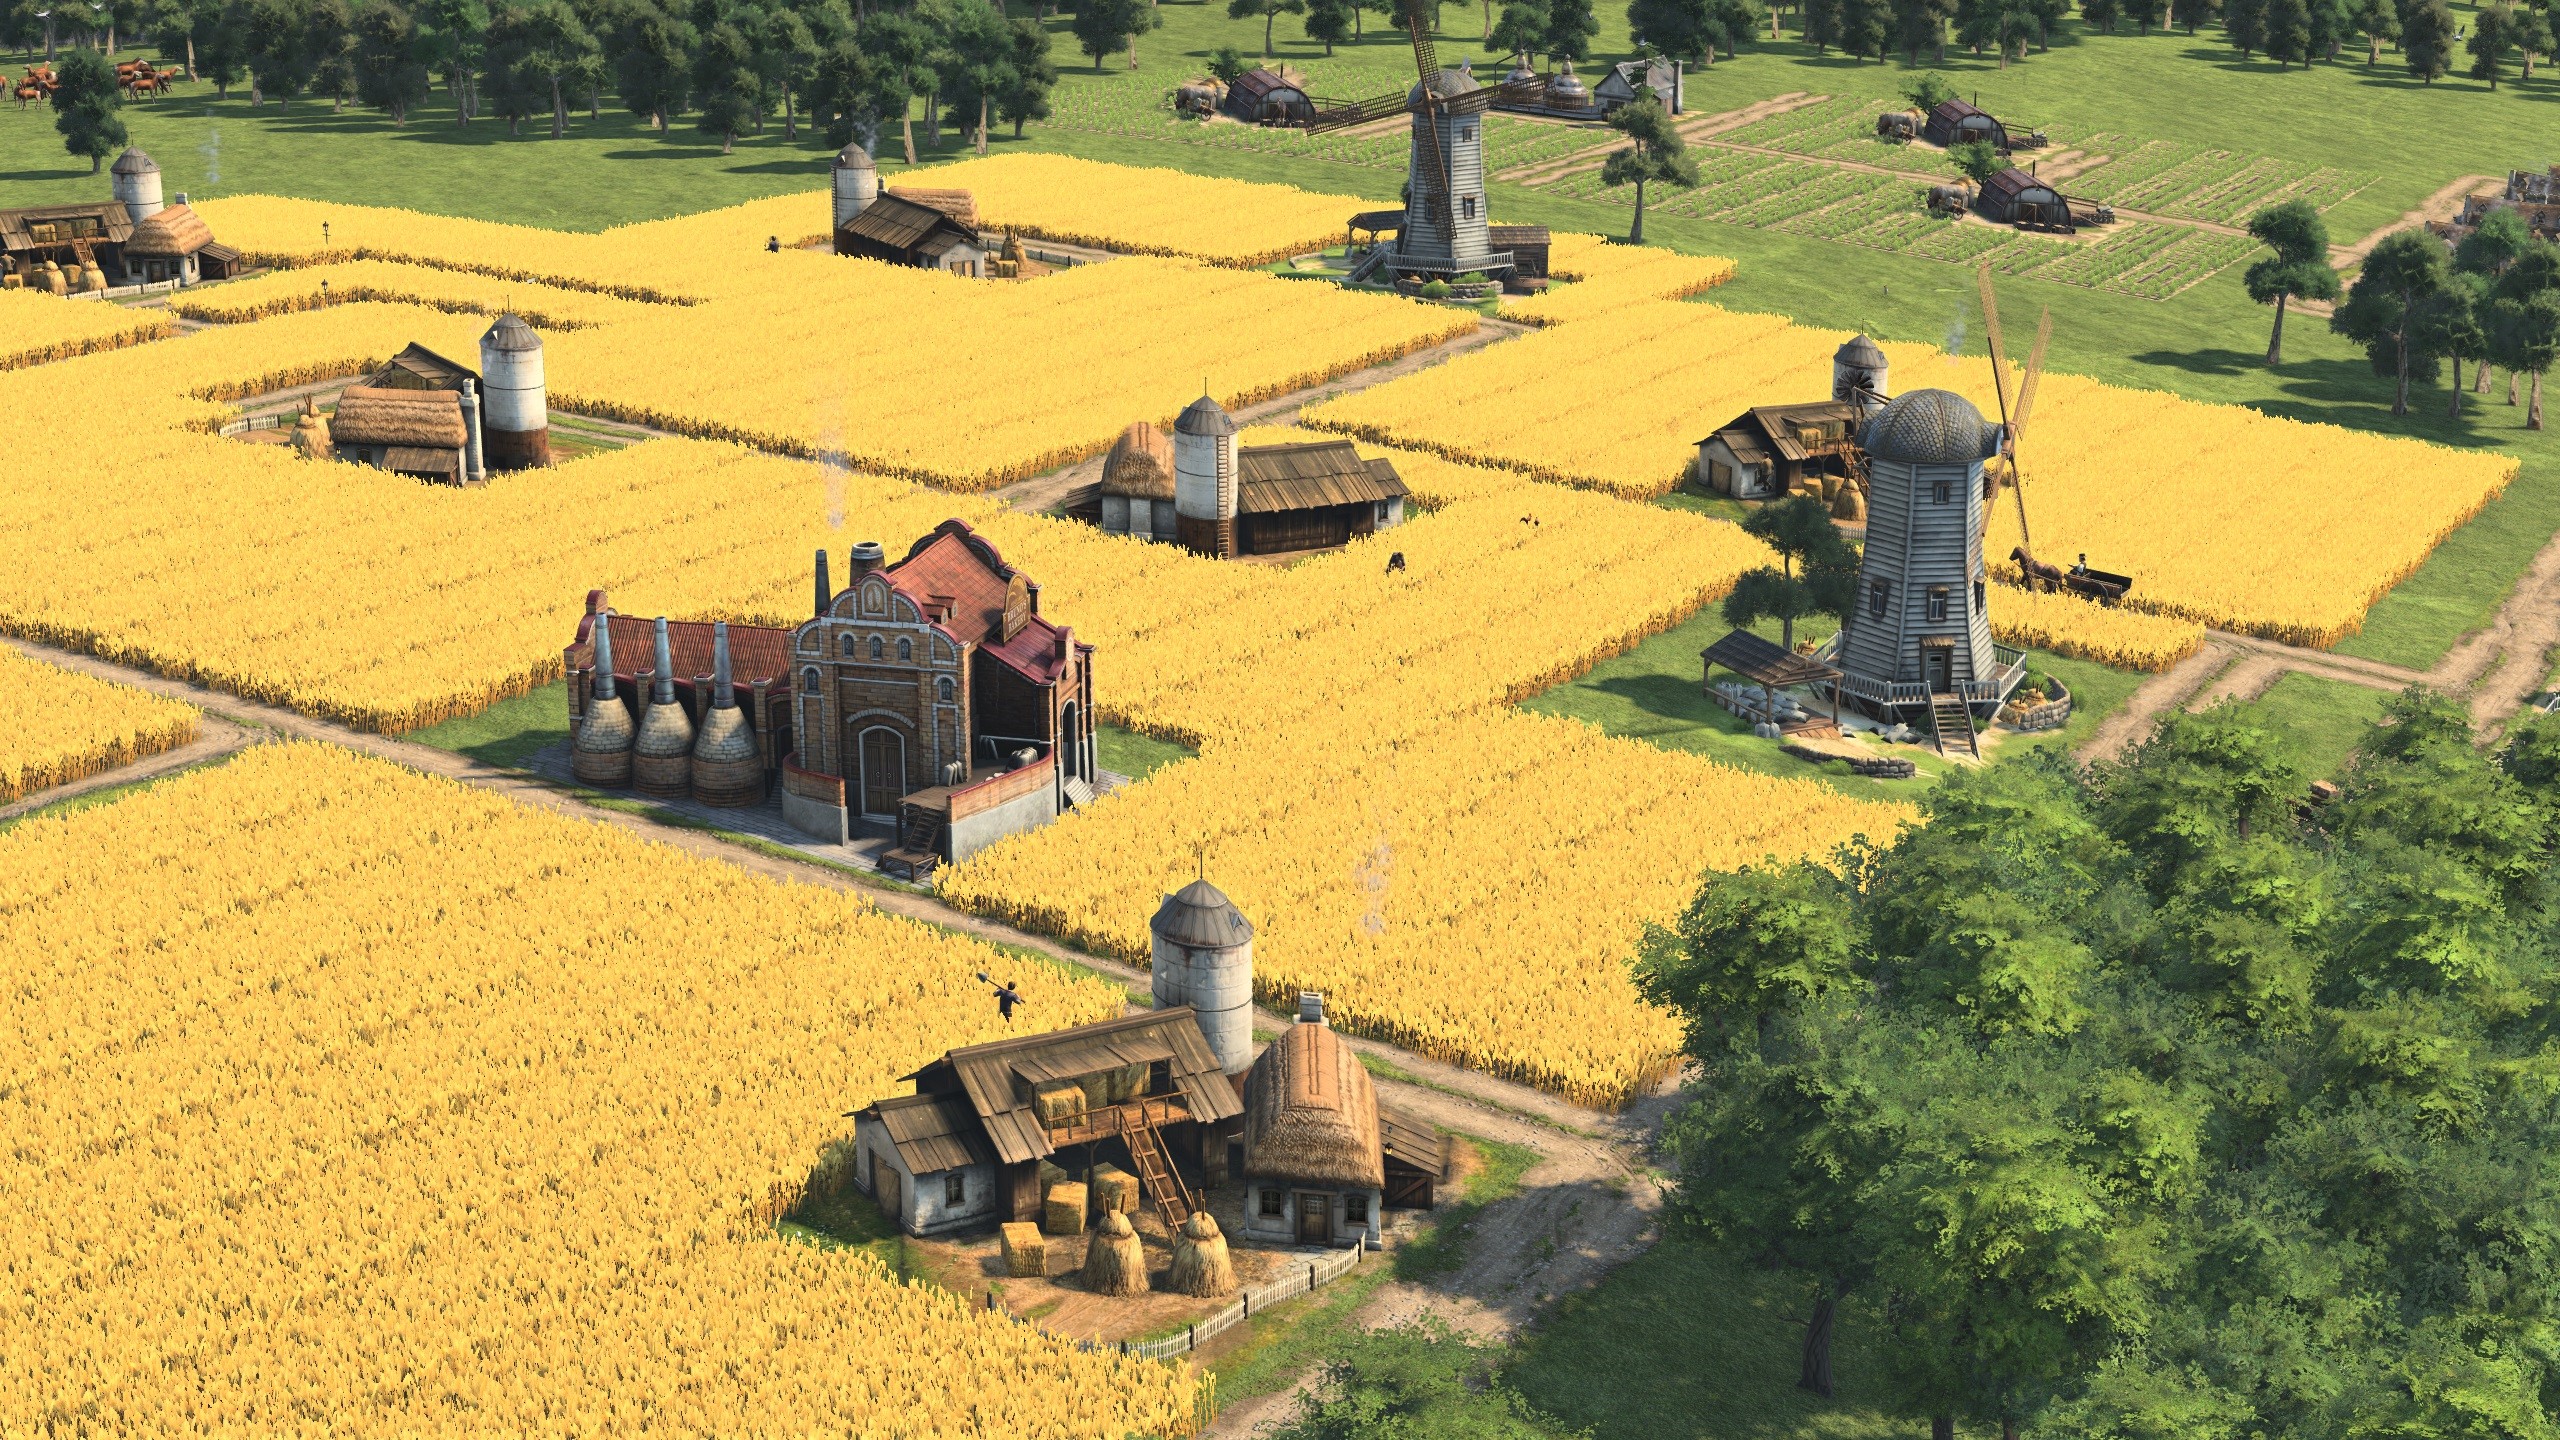 anno 1800 uplay